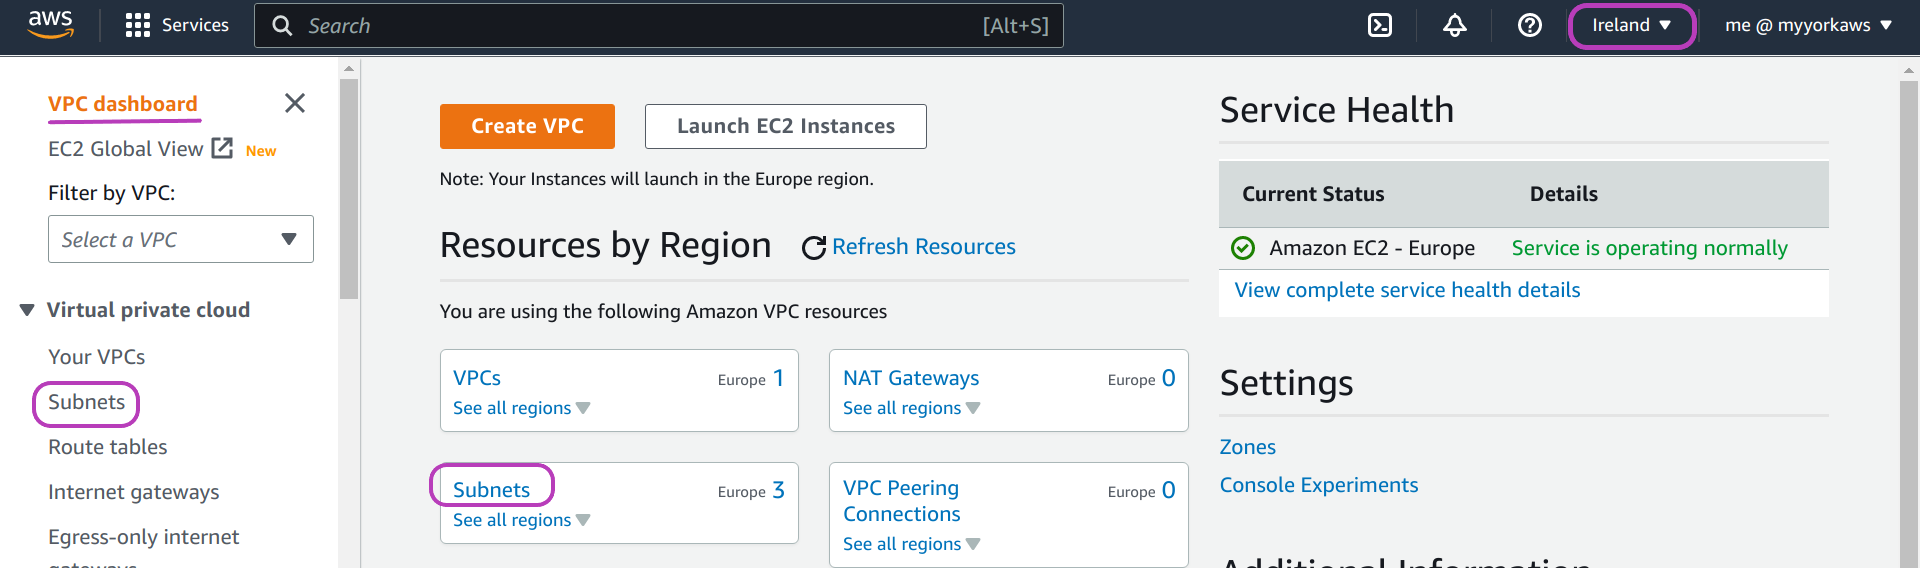 Screenshot of AWS Console "VPC Dashboard" page in a browser with the option Subnet on the menu pane on the left and on the body page on the left circled, and the region drop-down menu on the top right showing Ireland circled as well.